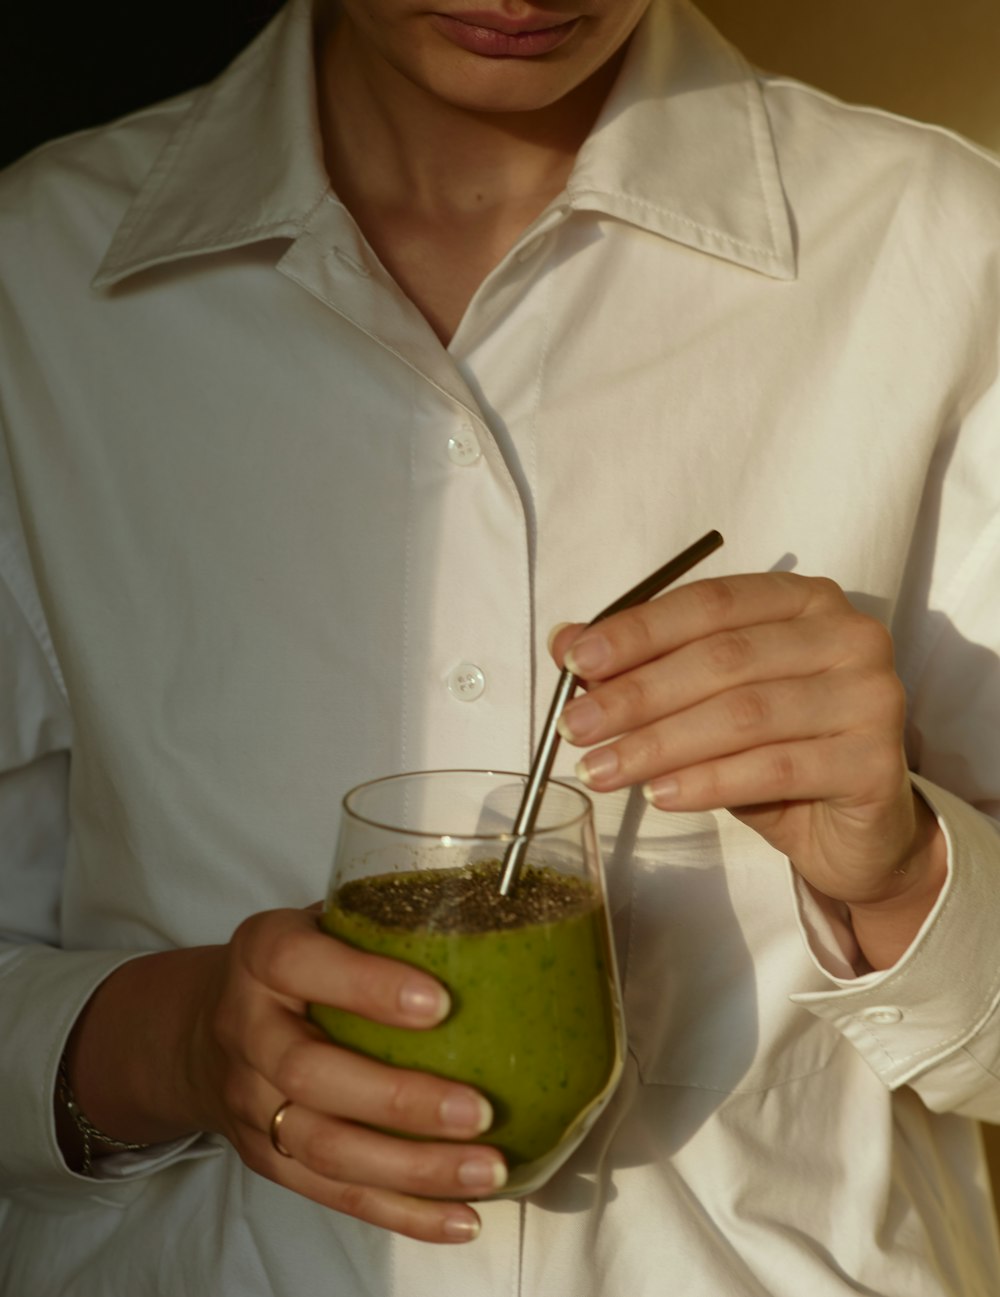 person in white button up shirt holding clear drinking glass with green liquid